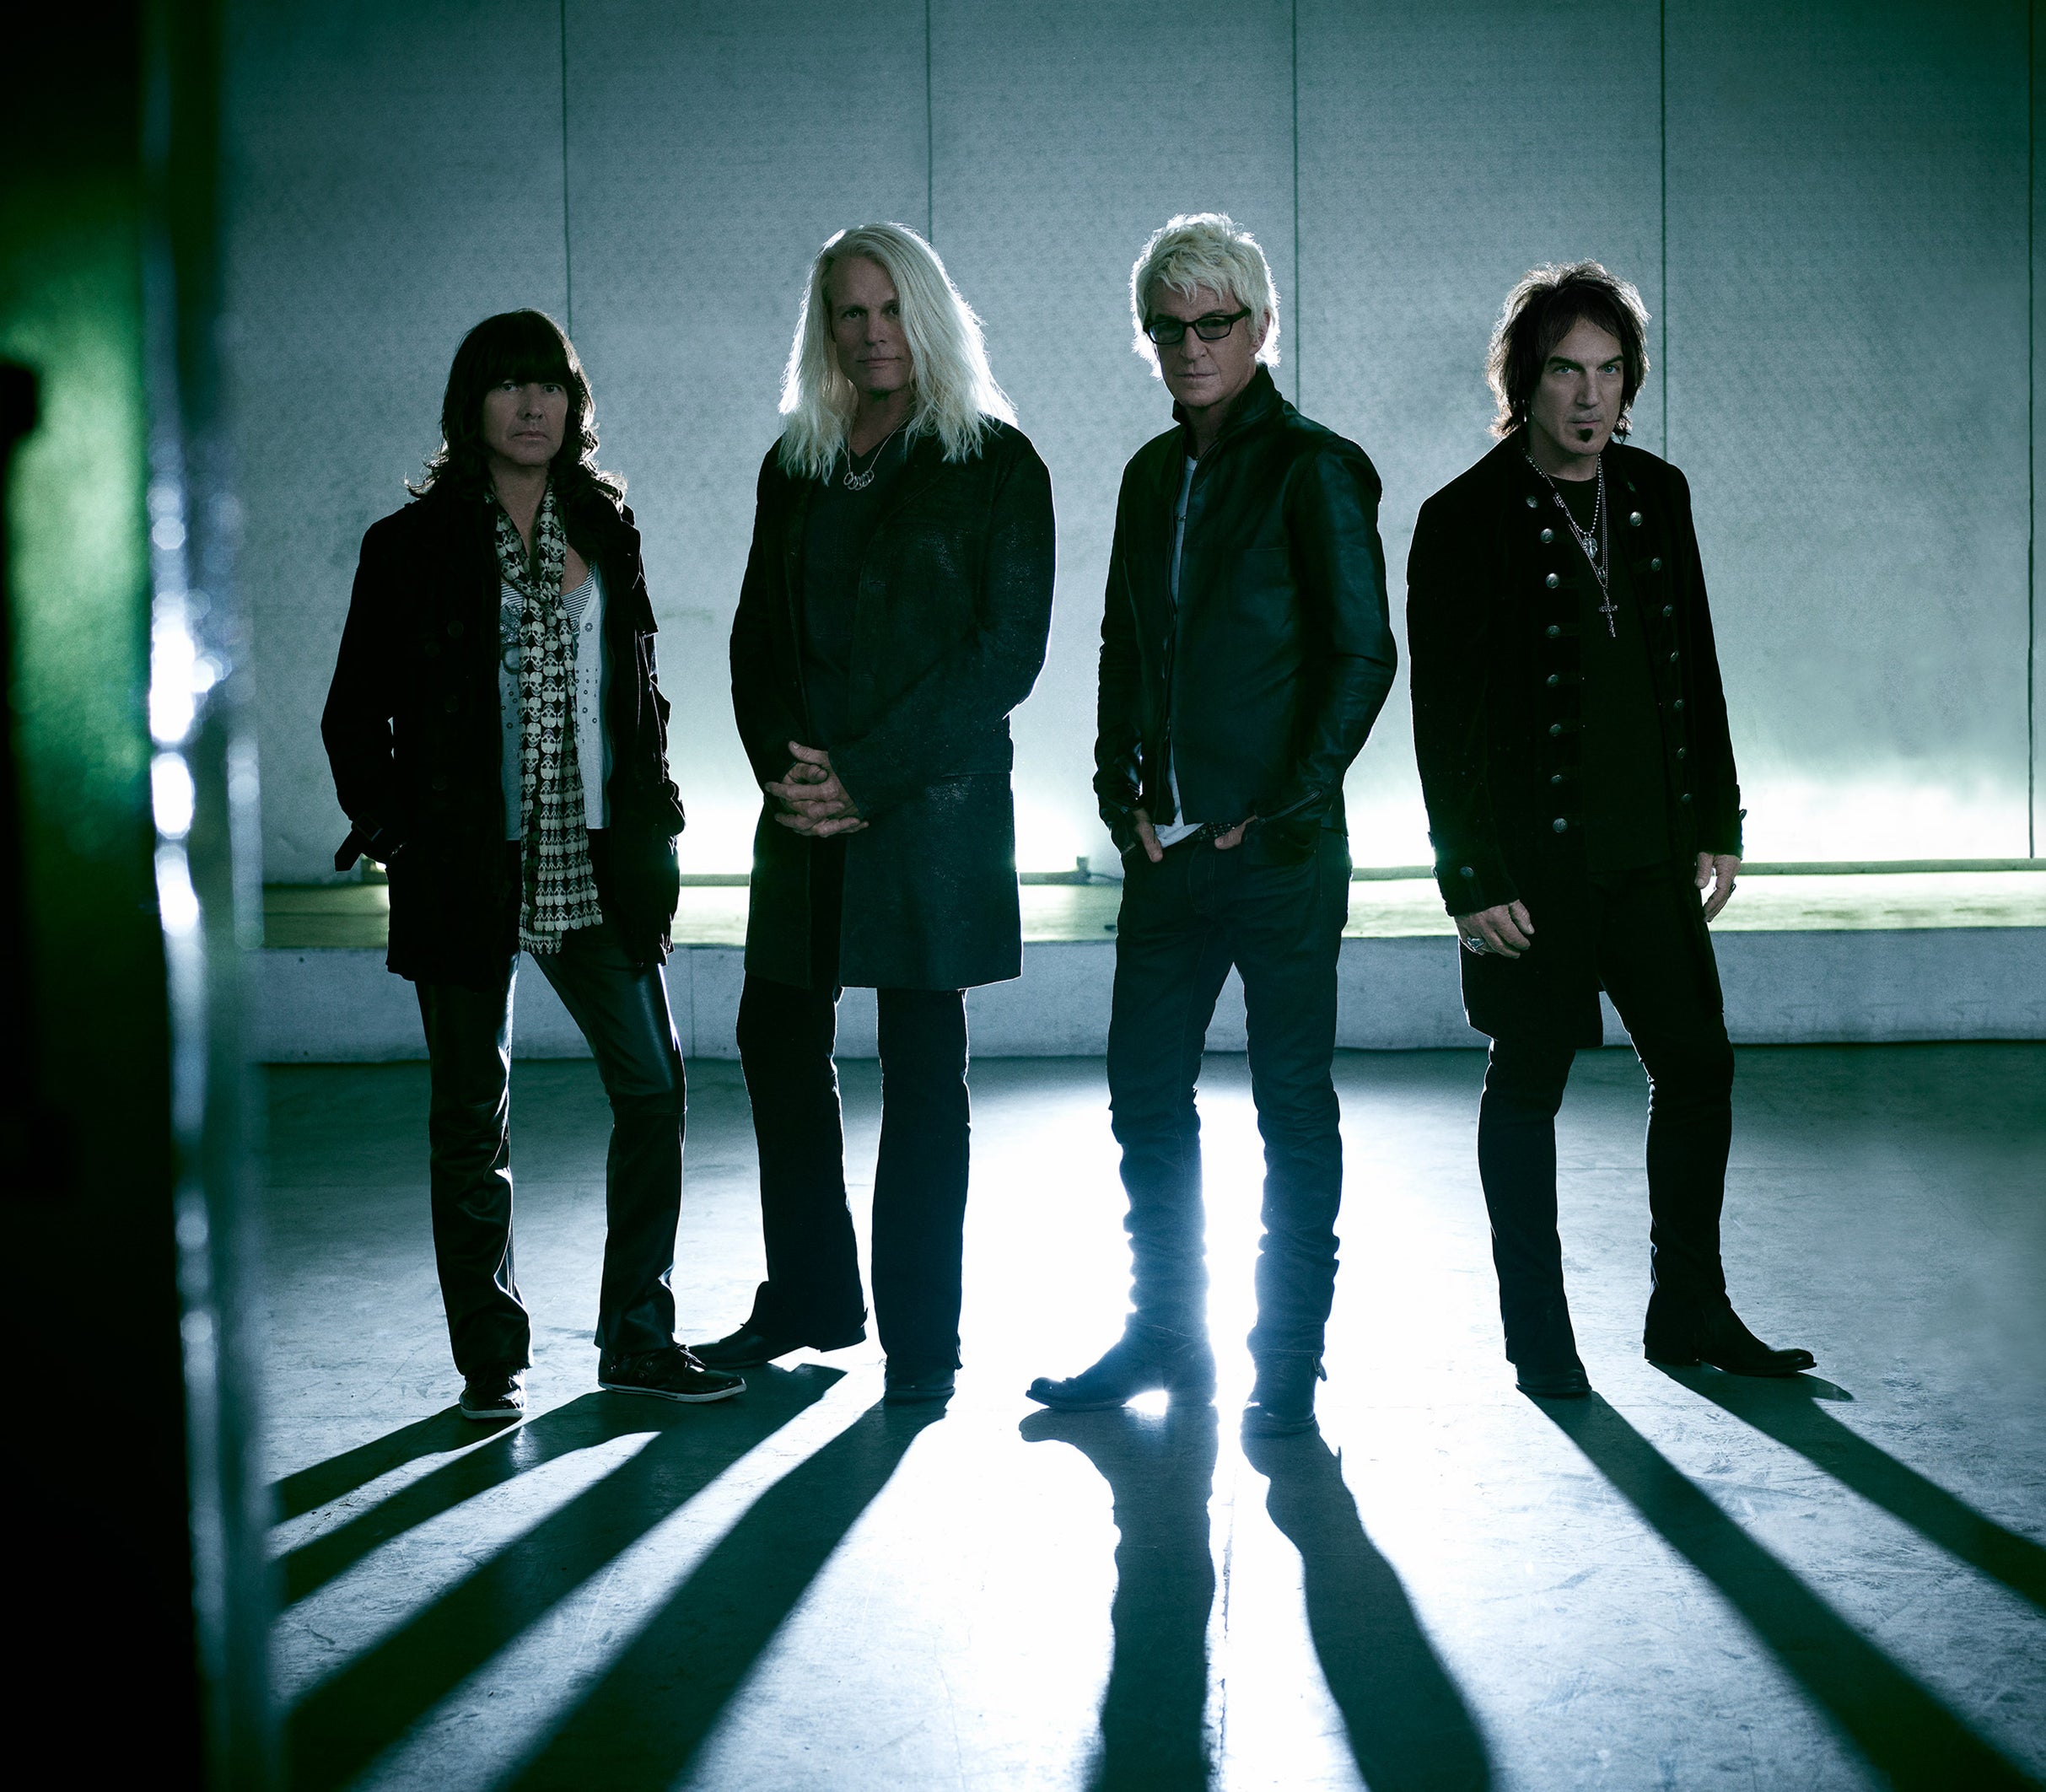 REO Speedwagon in Cherokee promo photo for Official Platinum presale offer code